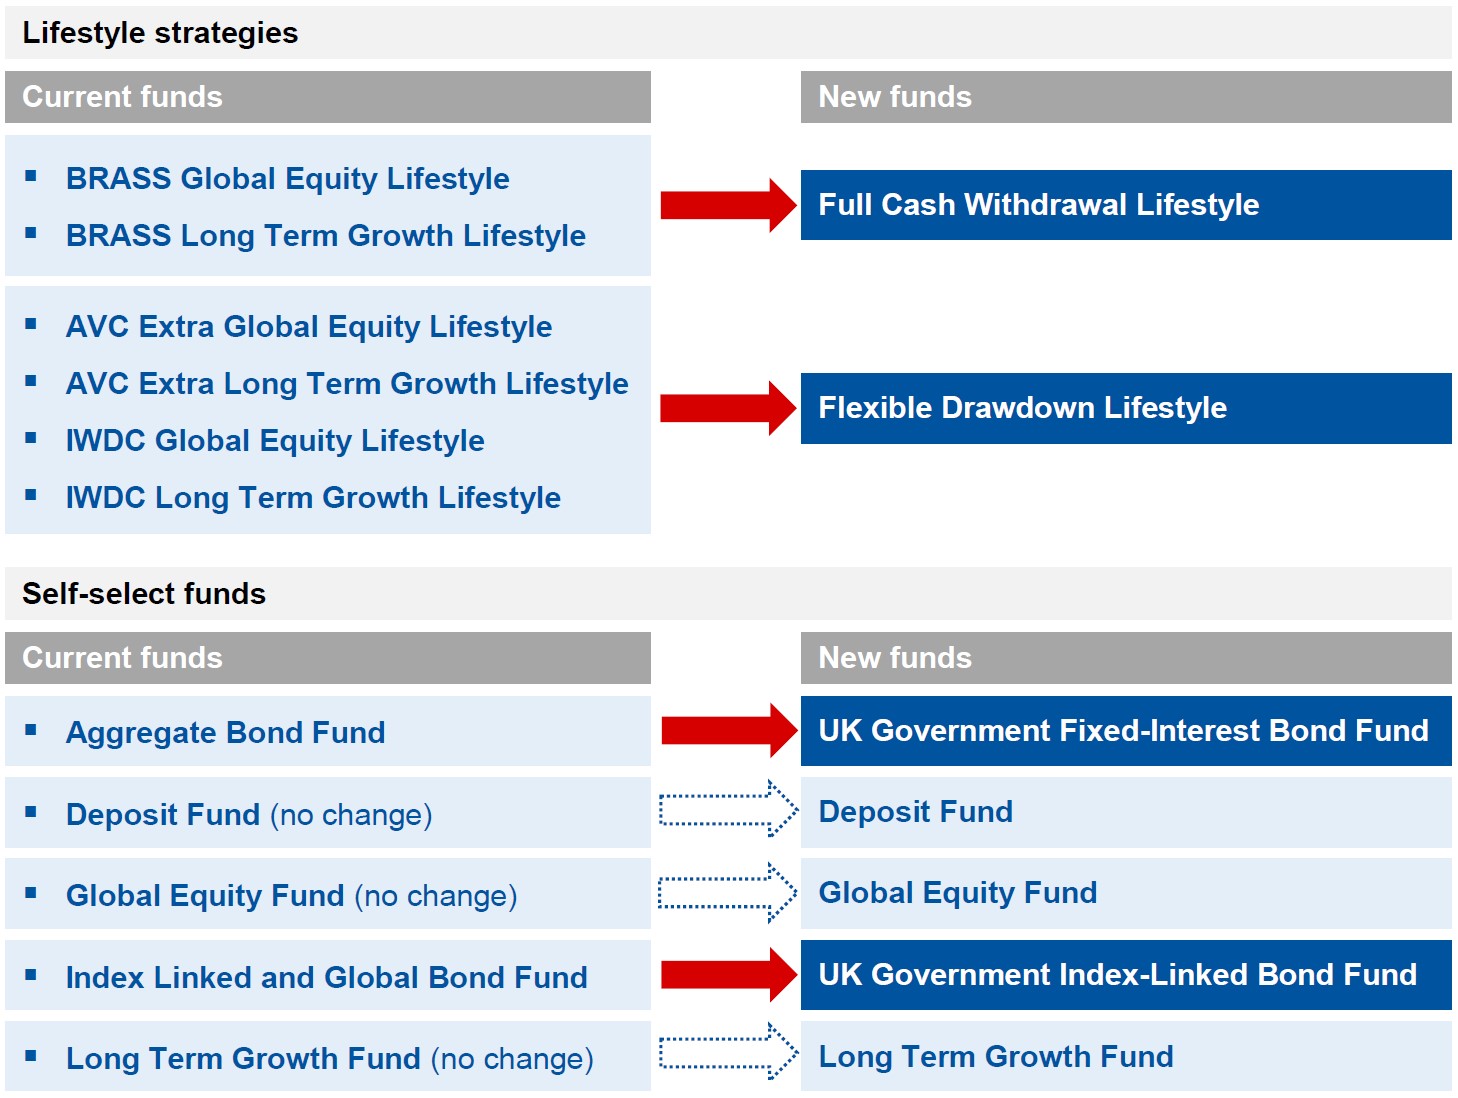 How existing funds will move into the new range